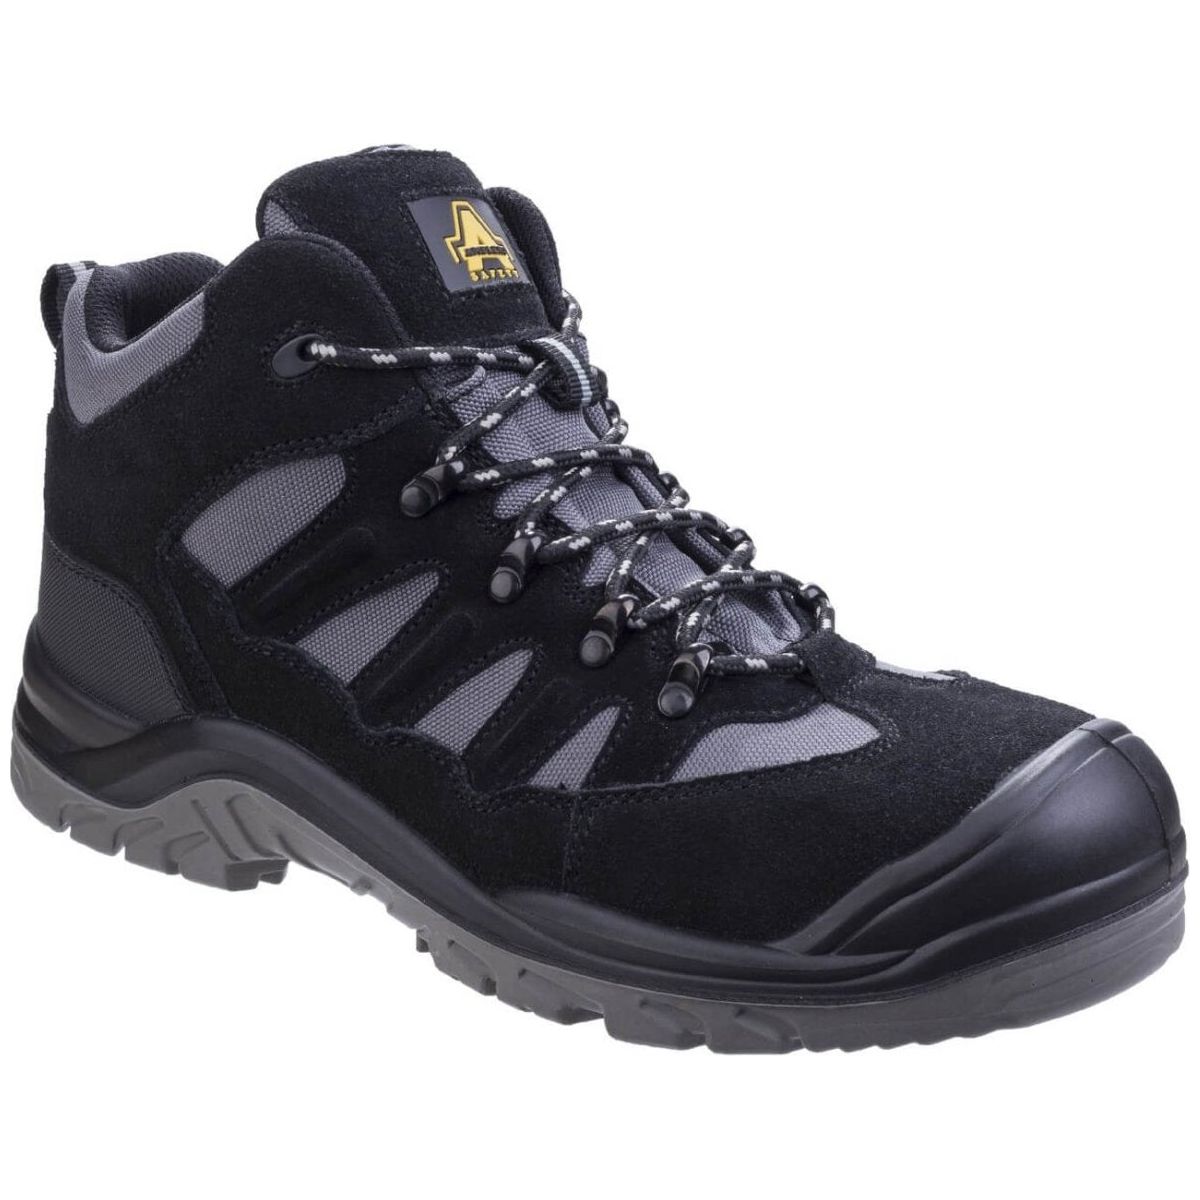 Amblers As251 Safety Hiking Boots Womens - workweargurus.com